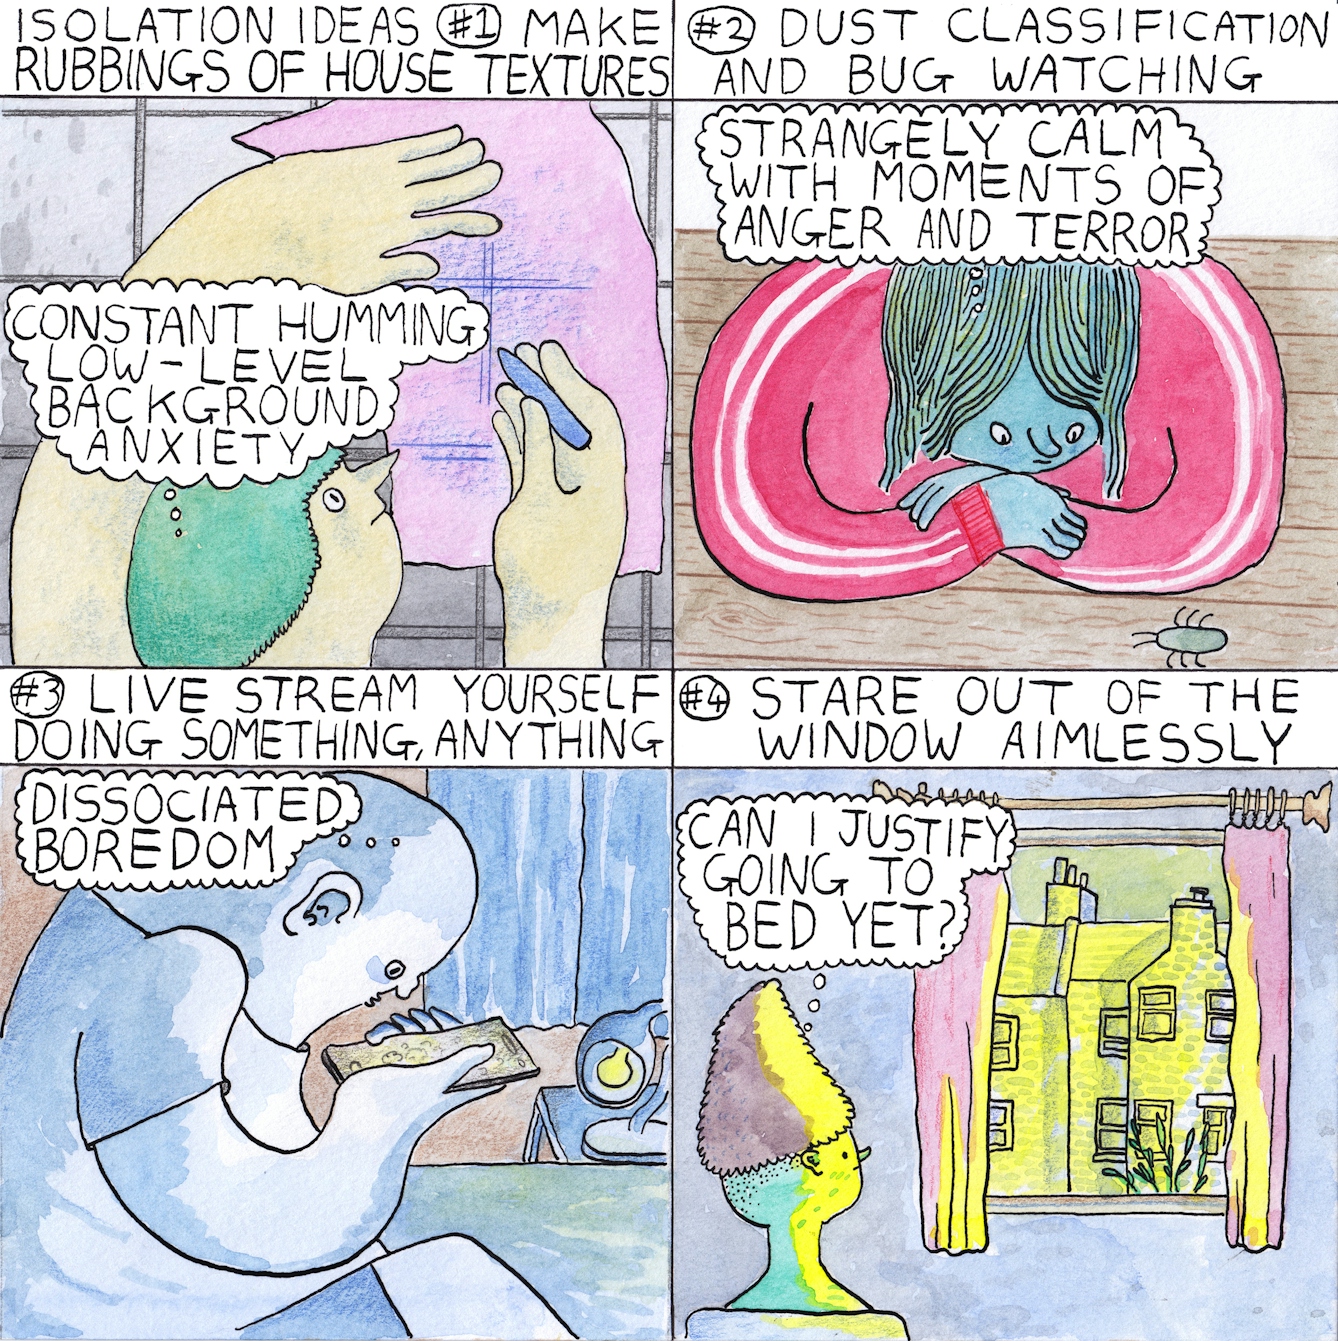 Isolation comic by Rob Bidder in four frames